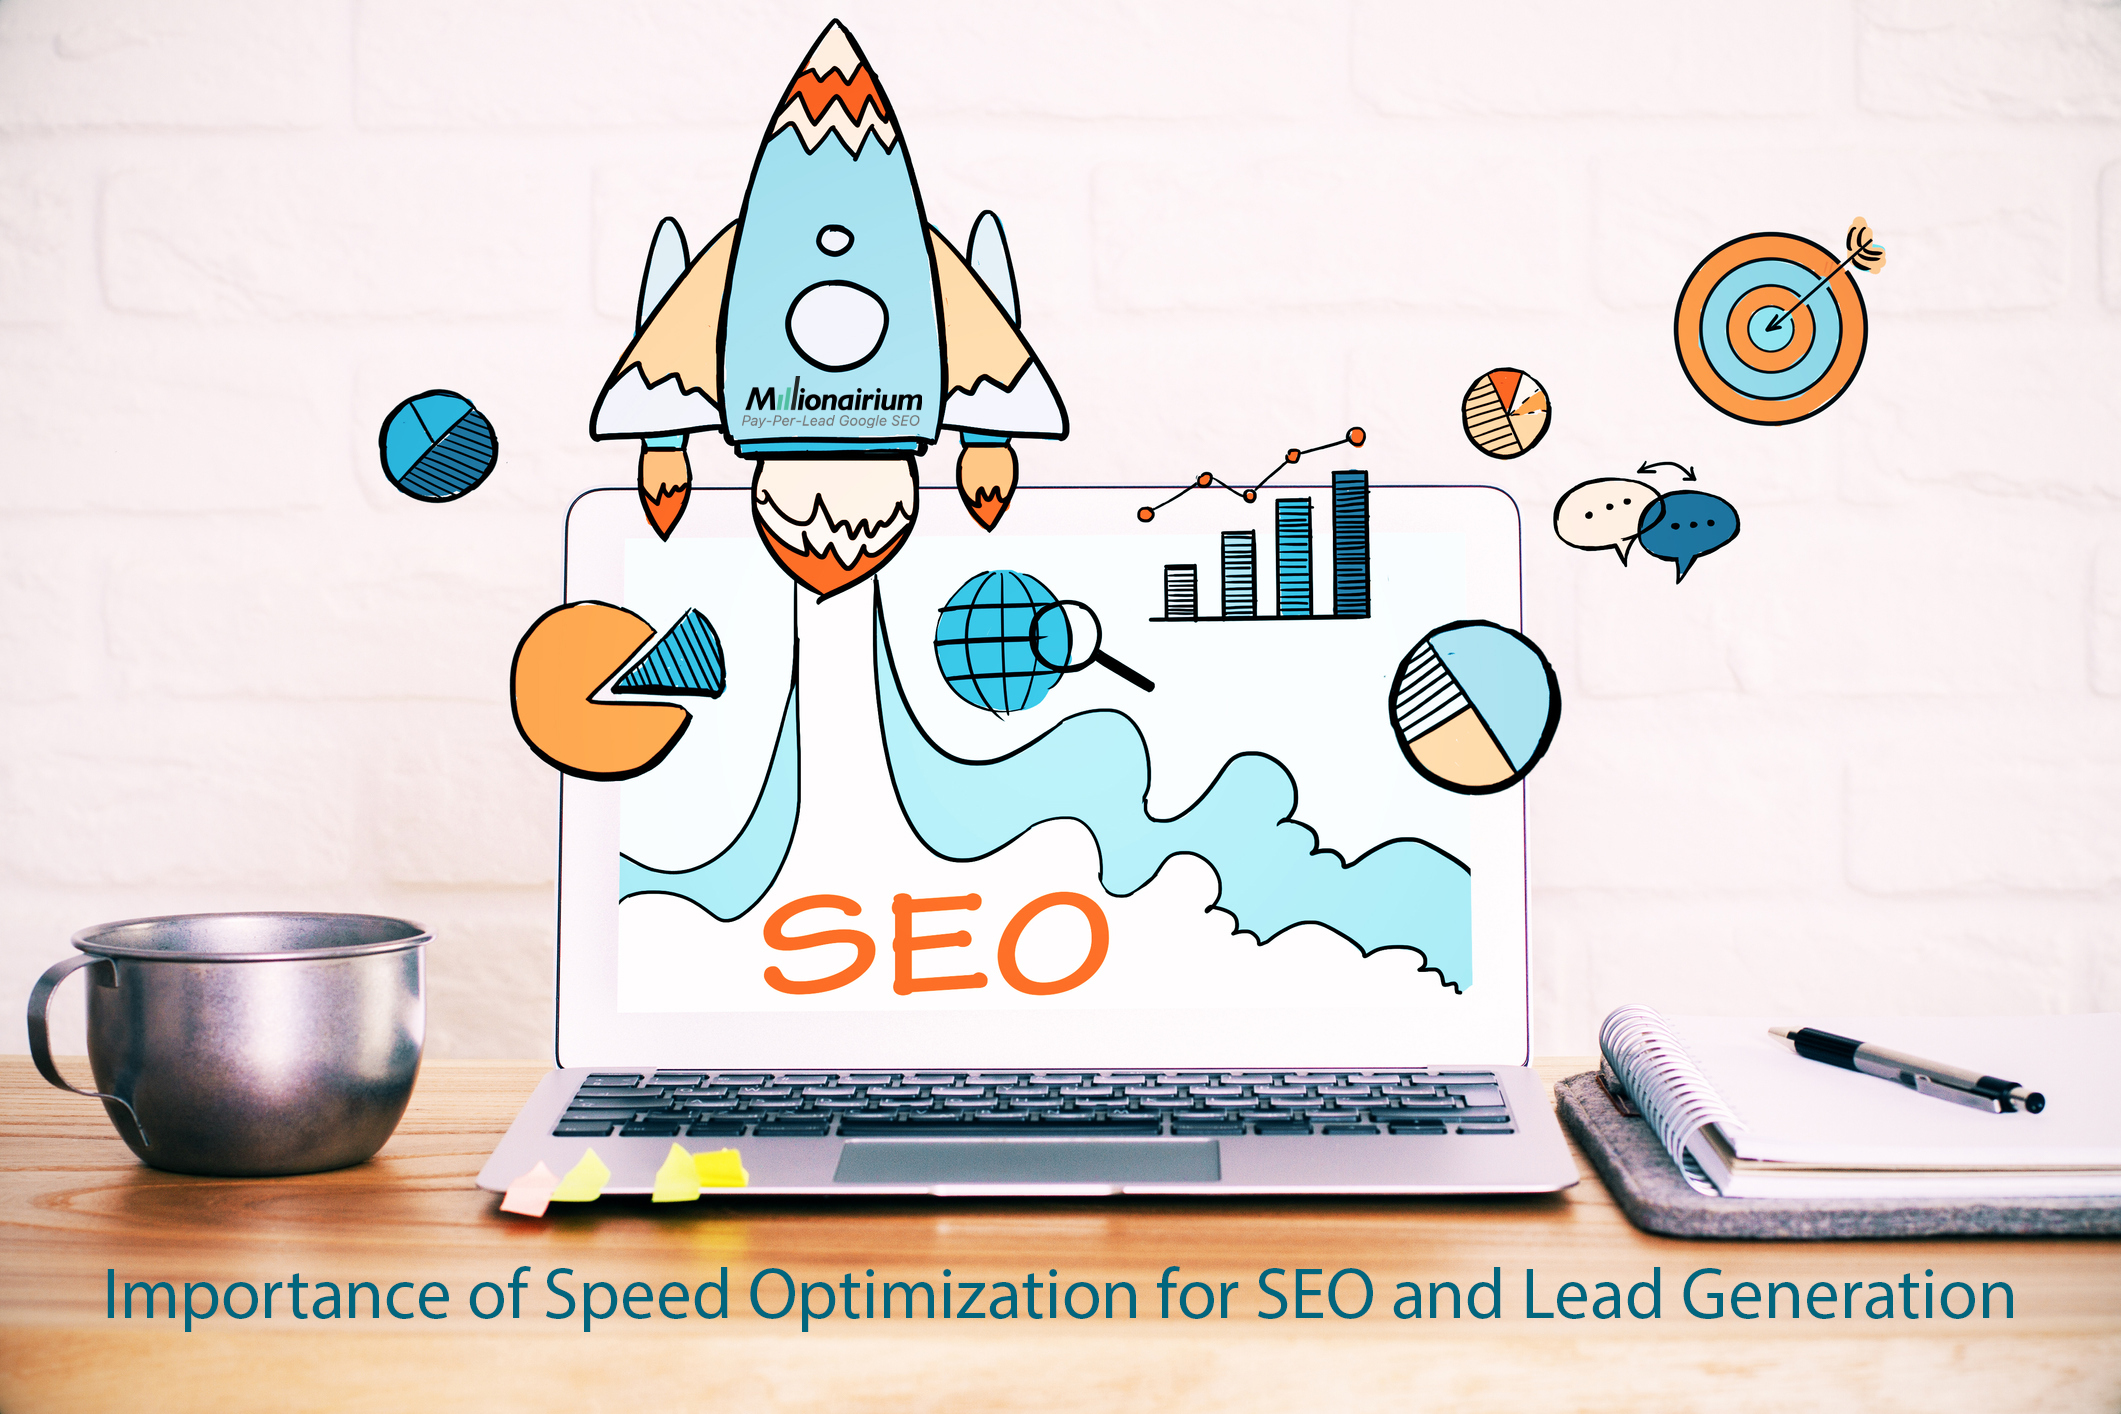 Importance of Speed Optimization for SEO and Lead Generation